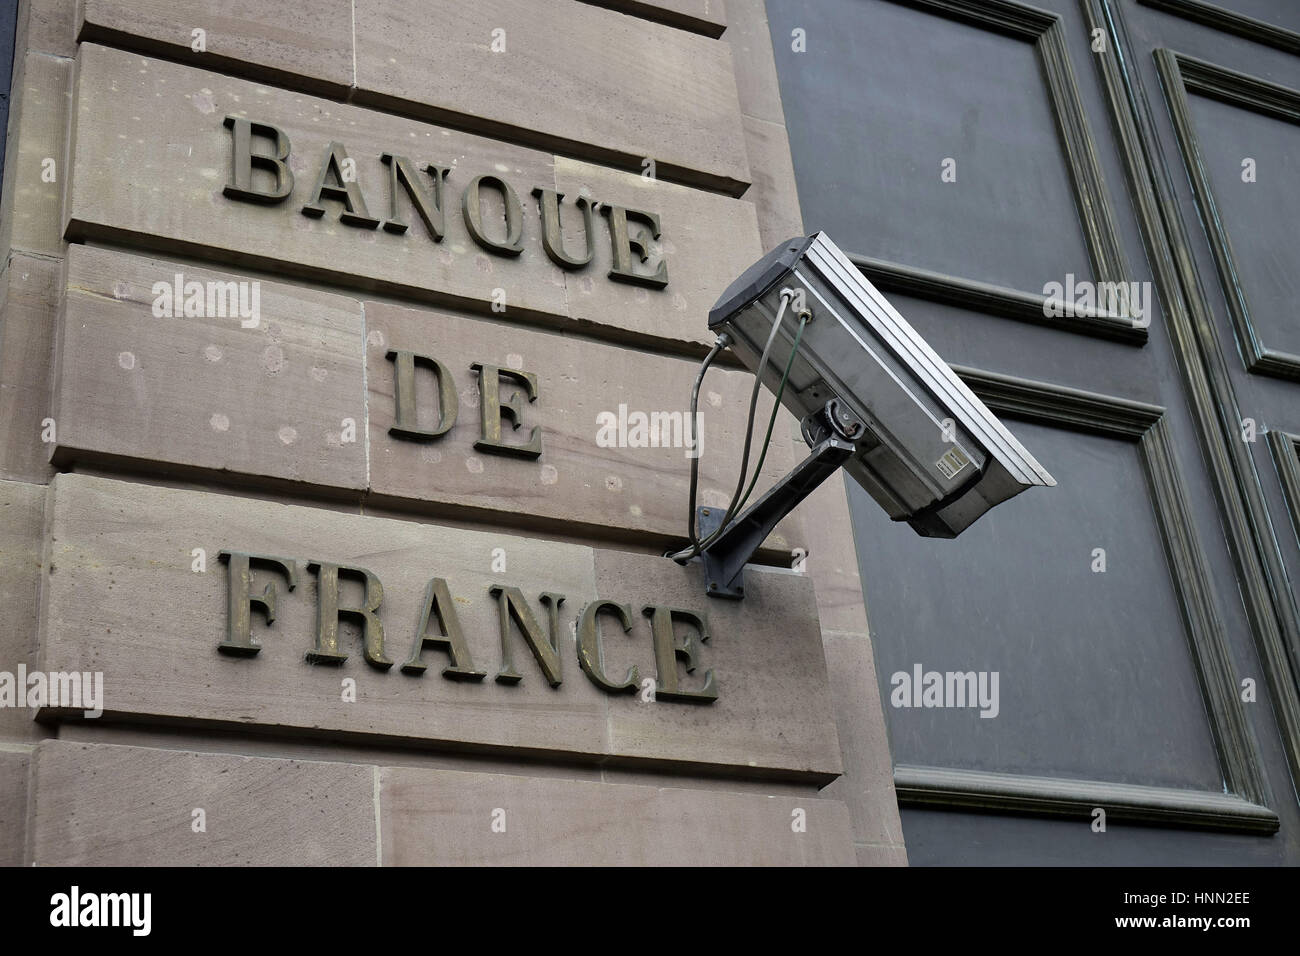 The lettering "Banque de France" and a surveillance camera on the facade of  the French Central